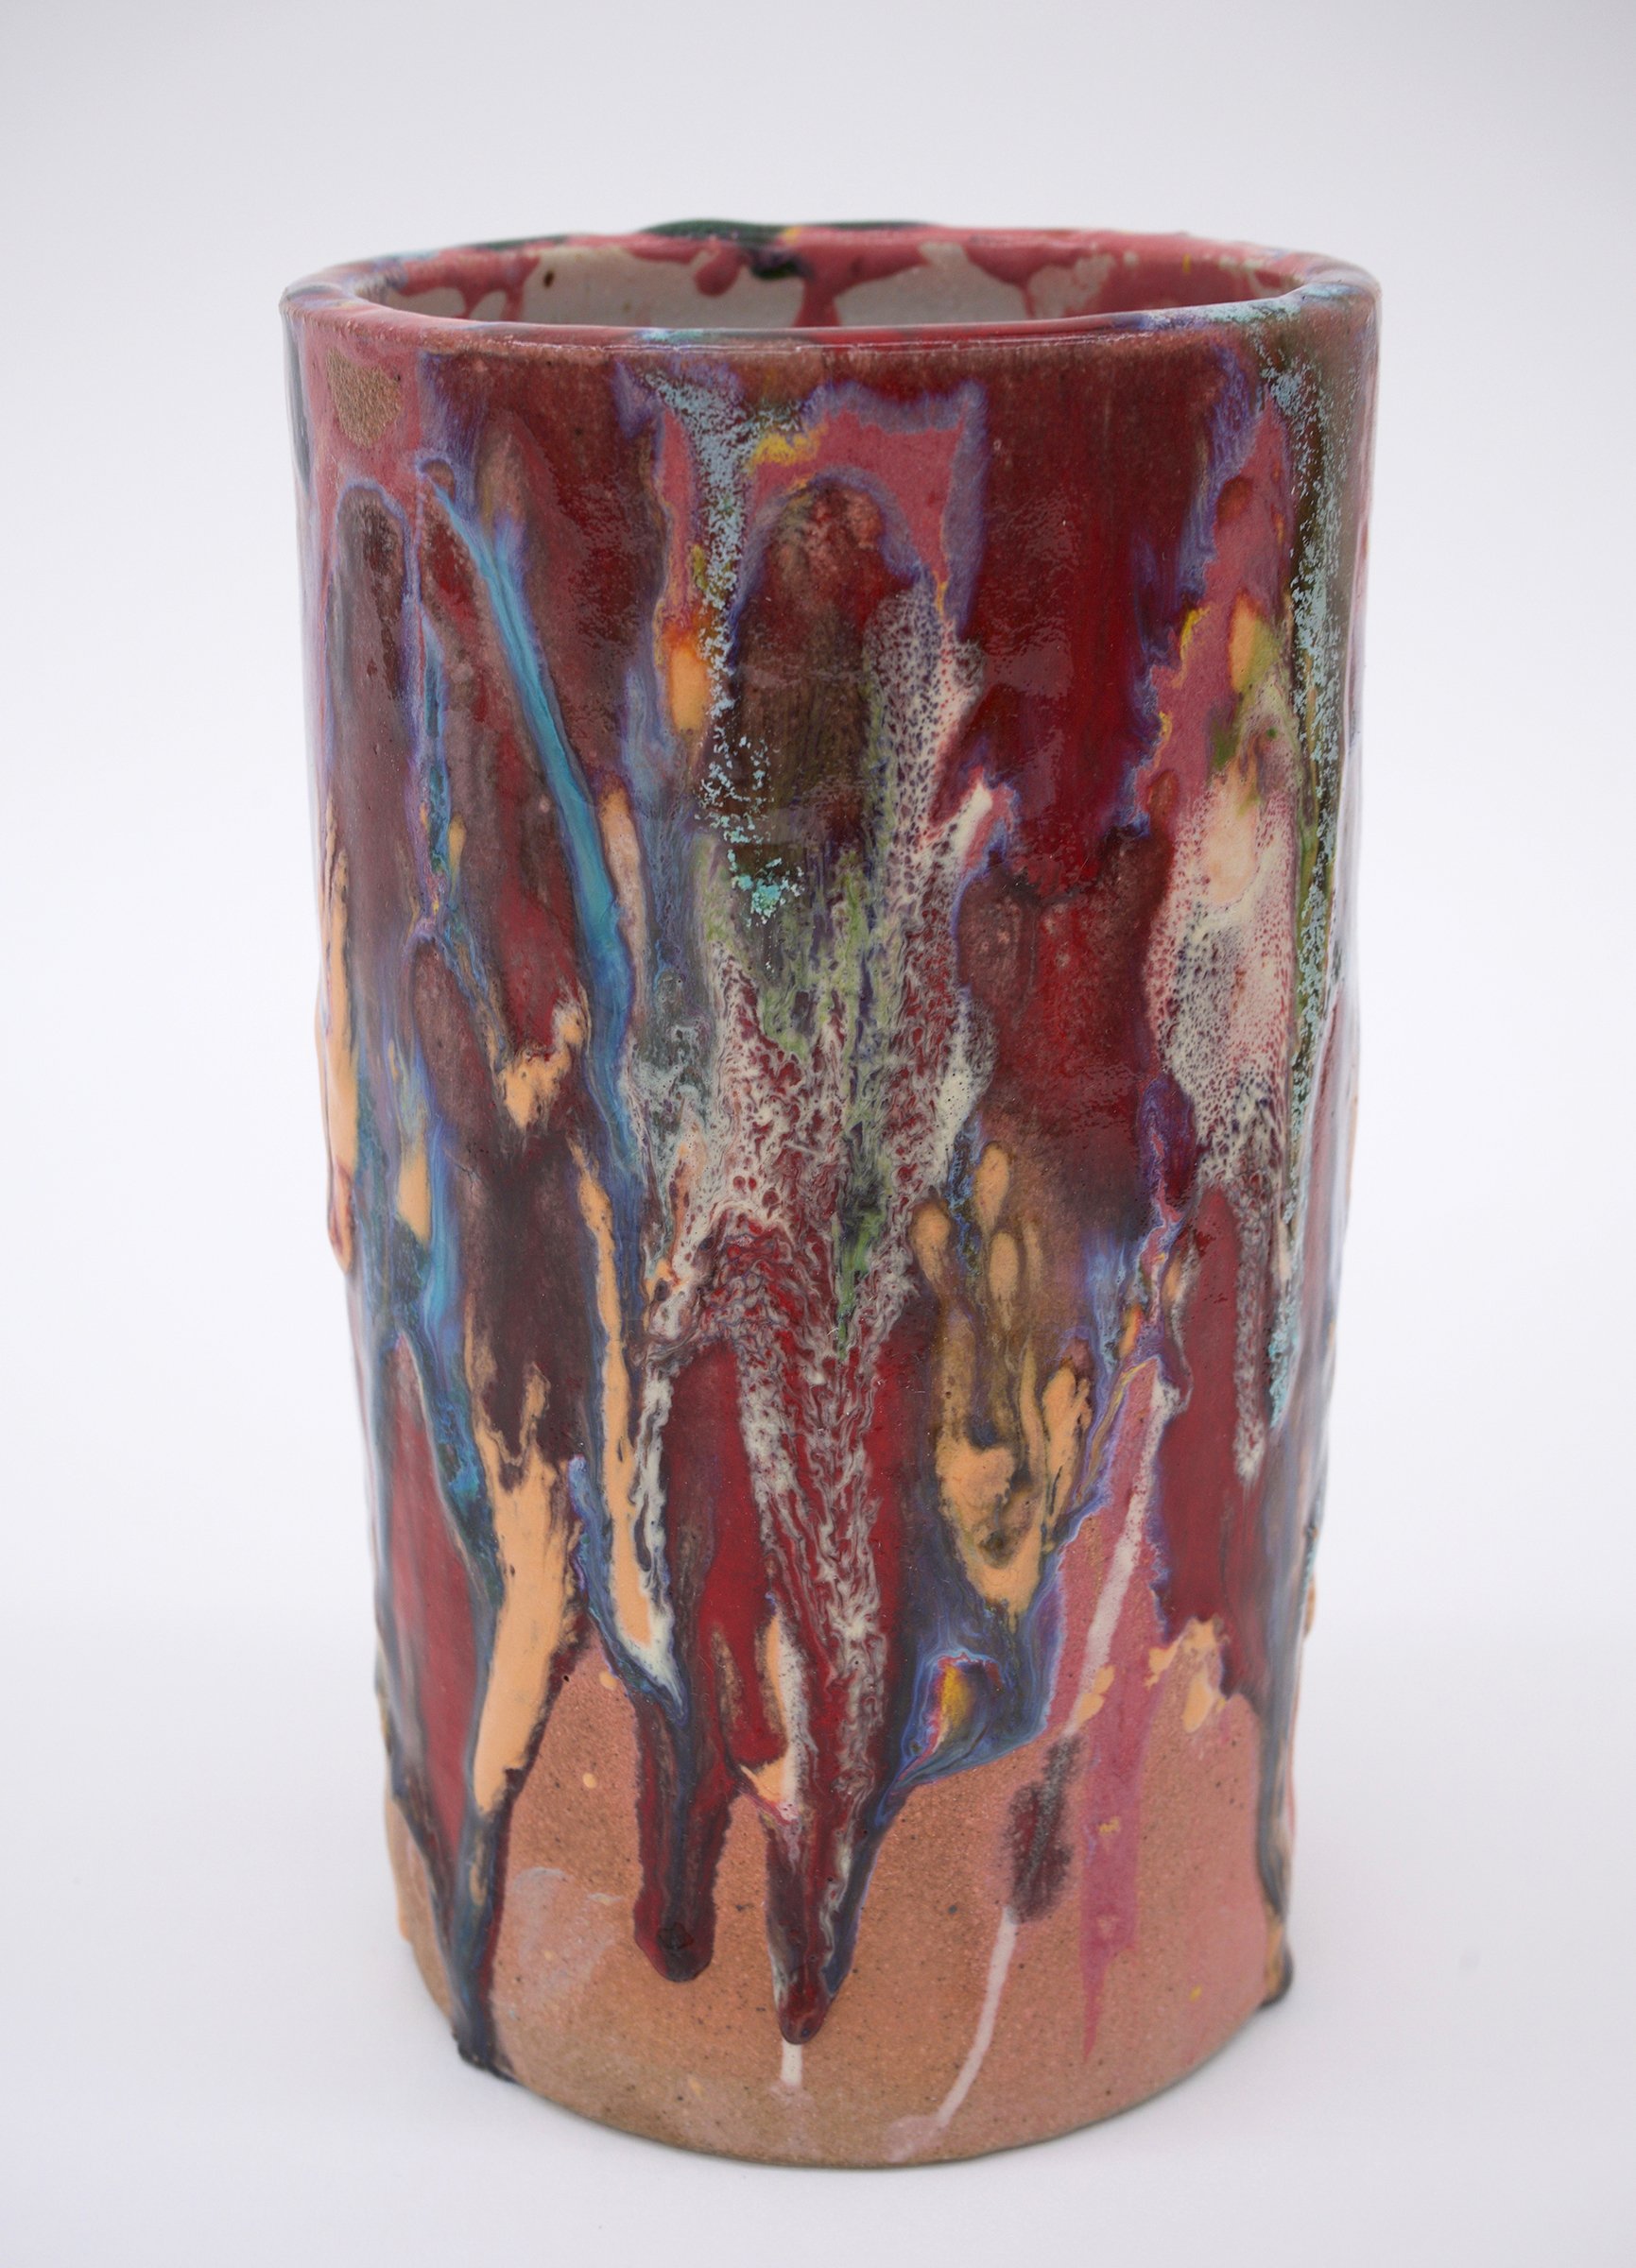   Untitled (Lava Lamps, Cylinder 2) , 2022 Multiply fired and layered glazes on stoneware 8.5” x 5” 